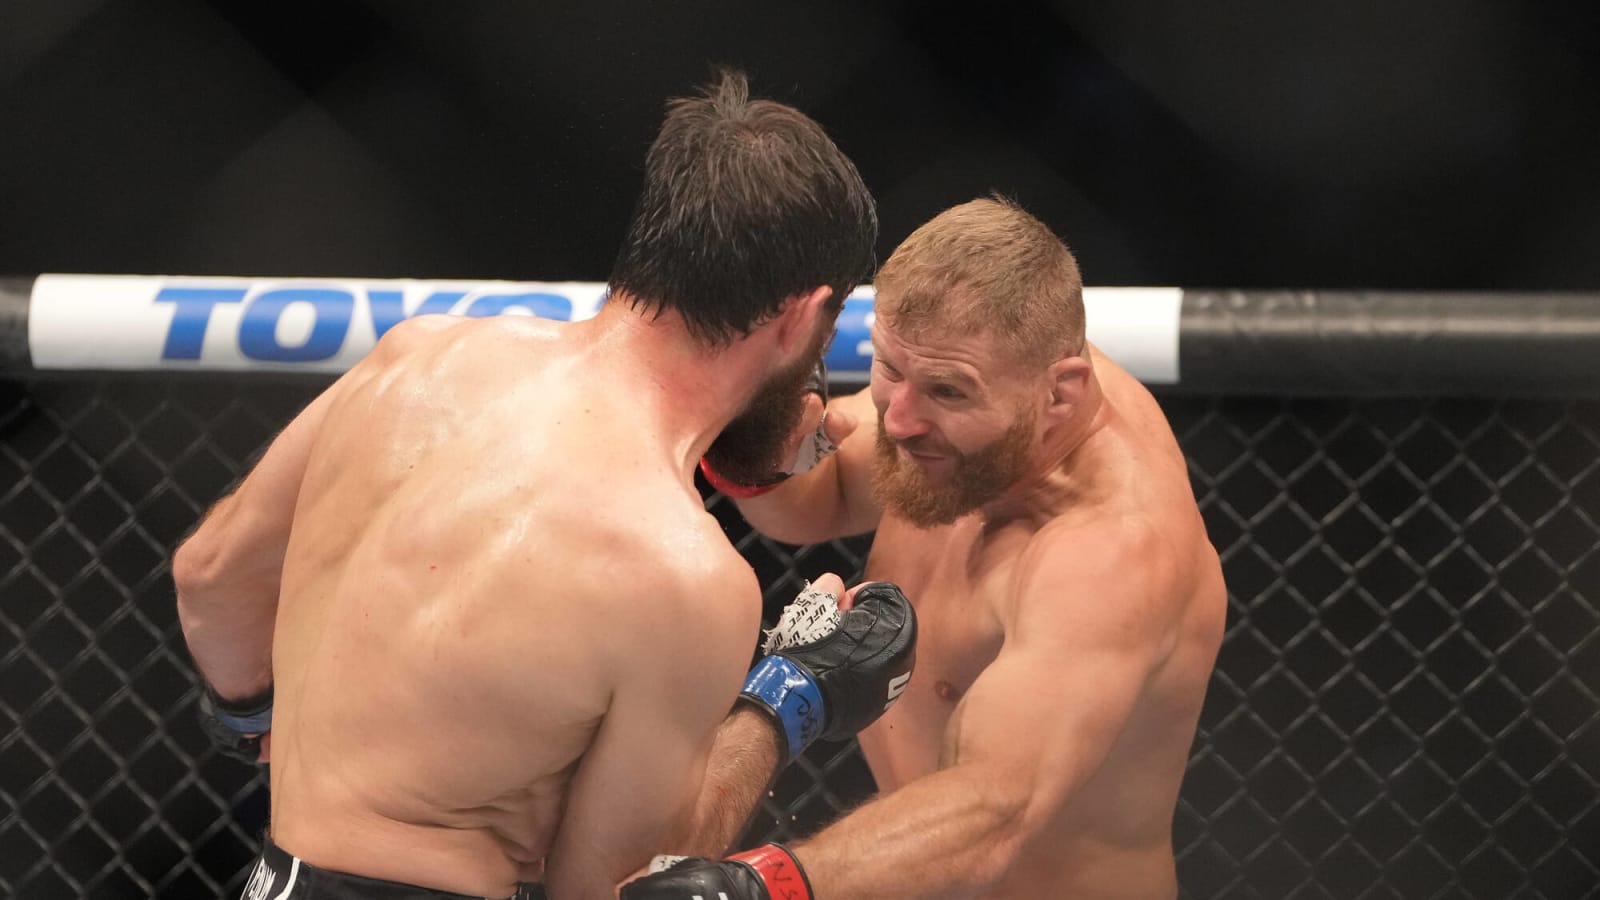 Ex-UFC Champ Jan Blachowicz to Require Two Separate Shoulder Surgeries